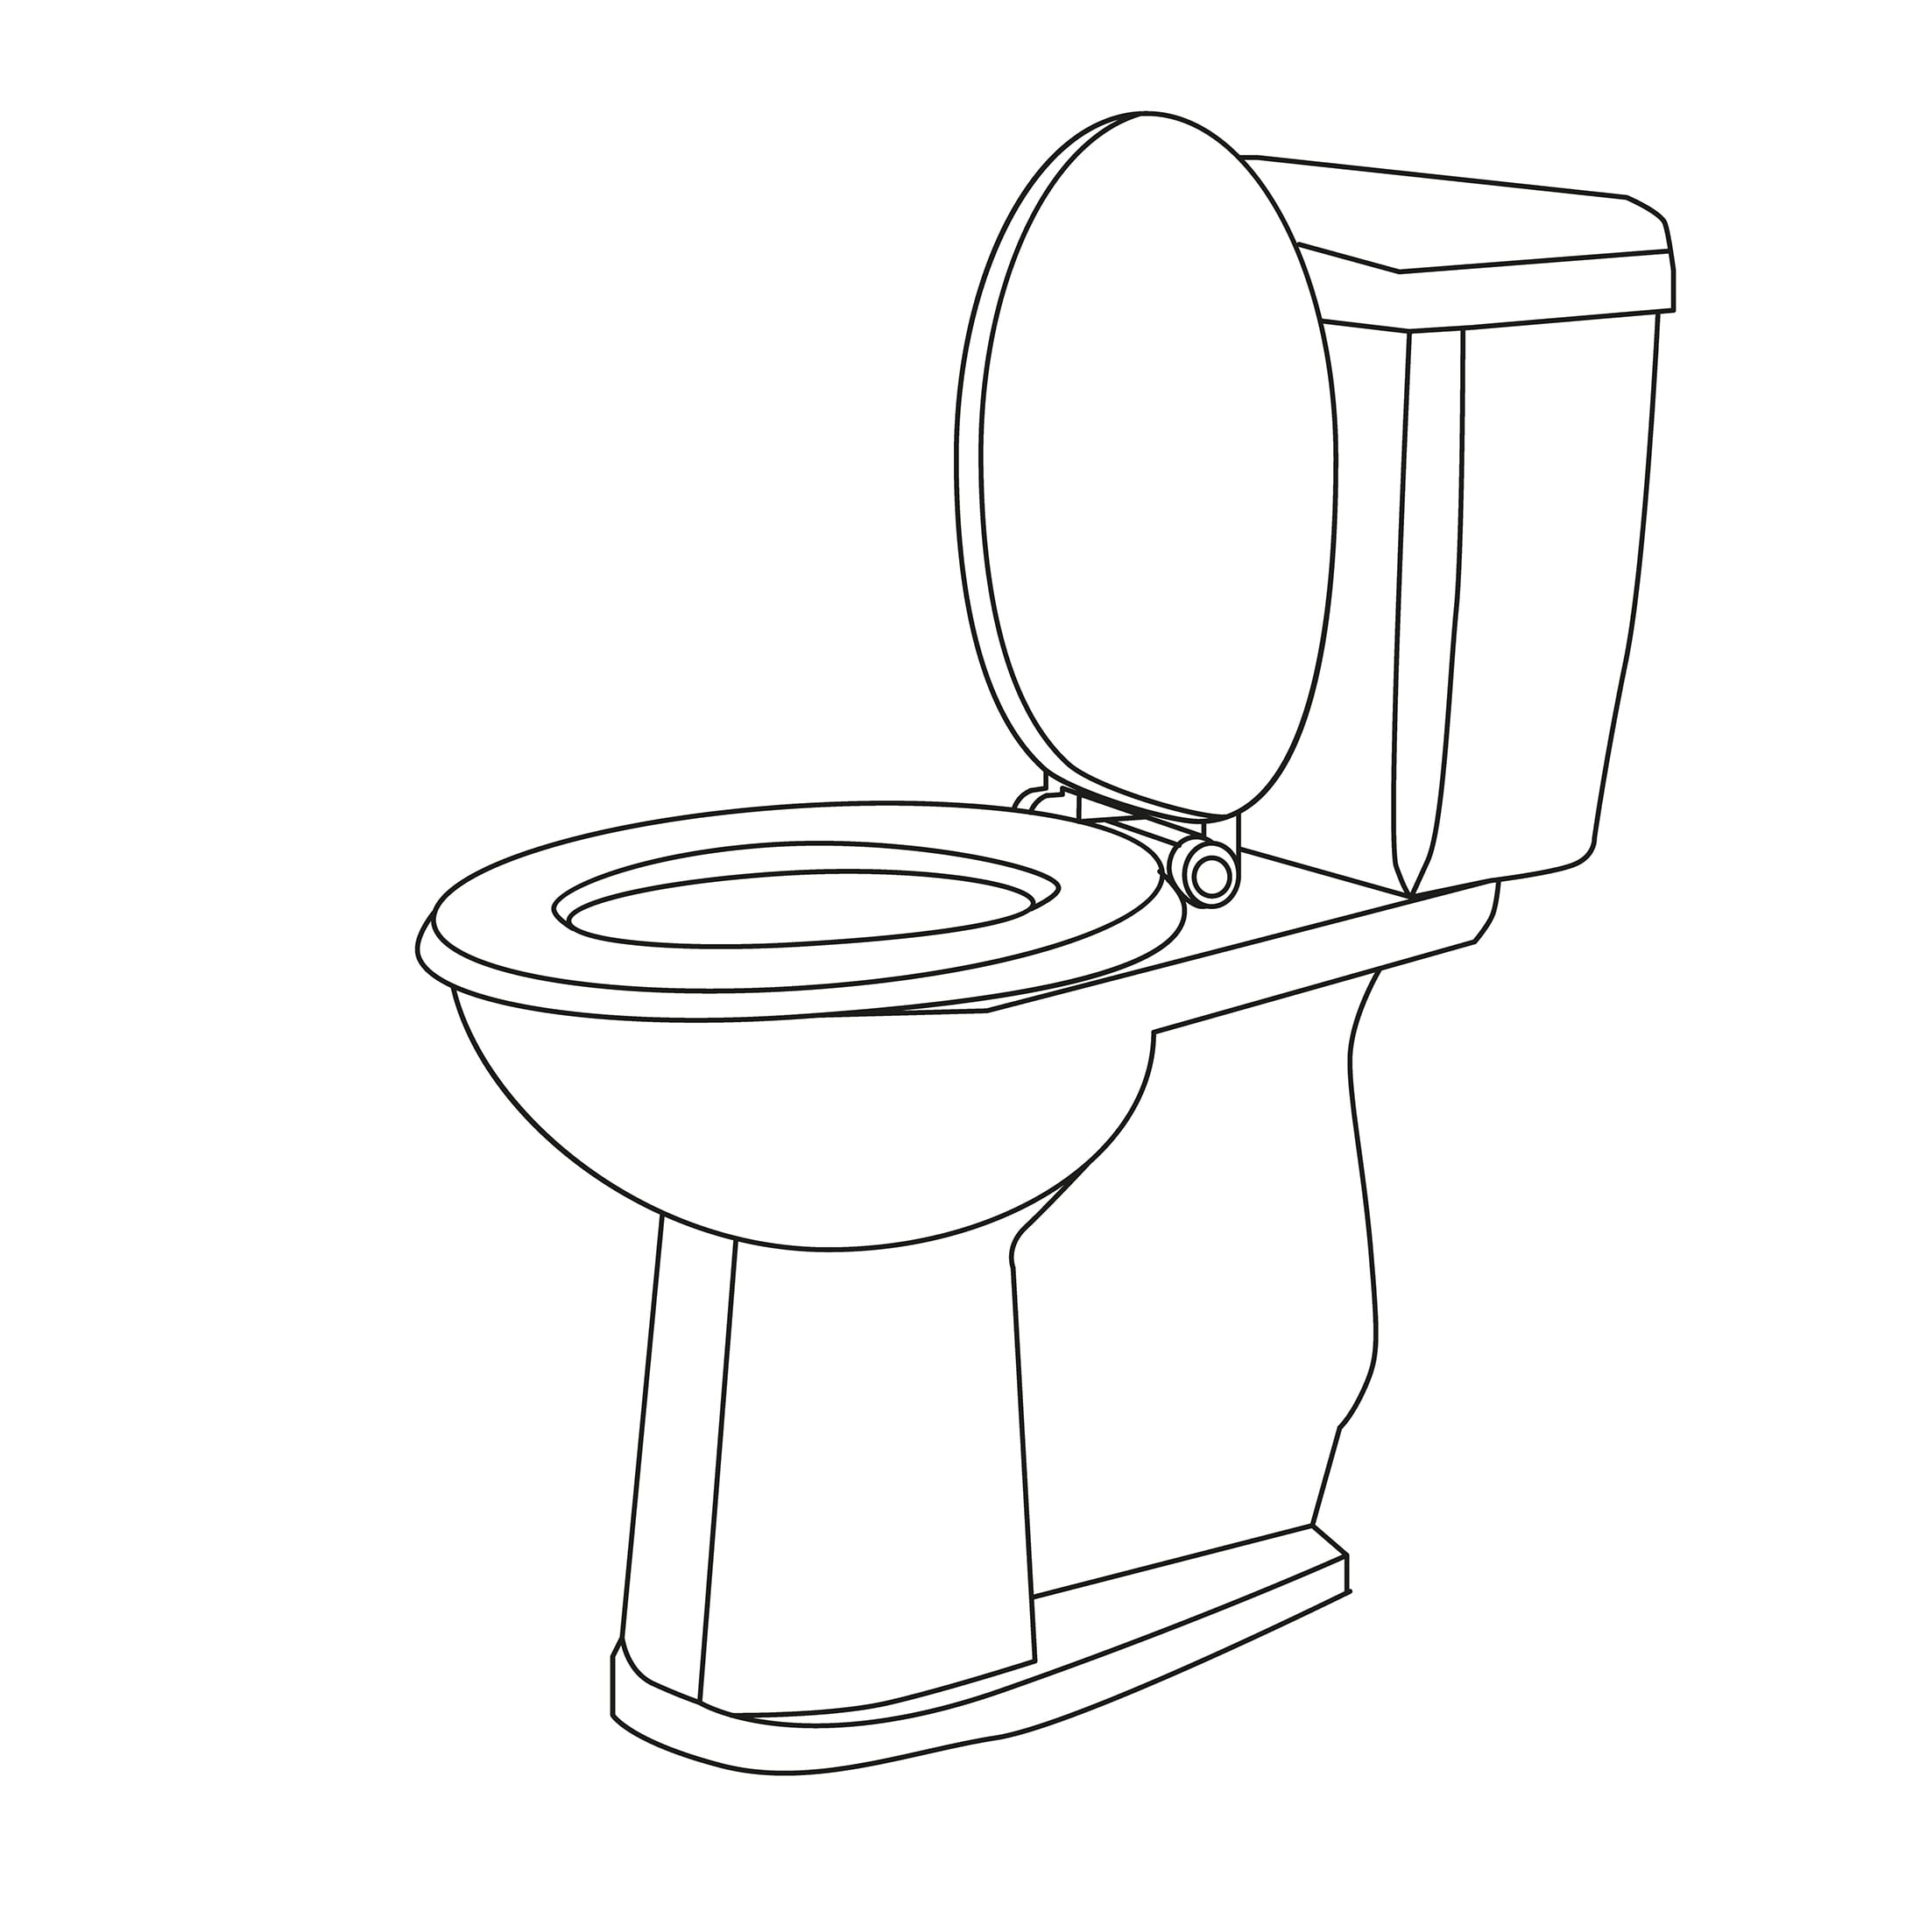 Things you should never put down your toilet